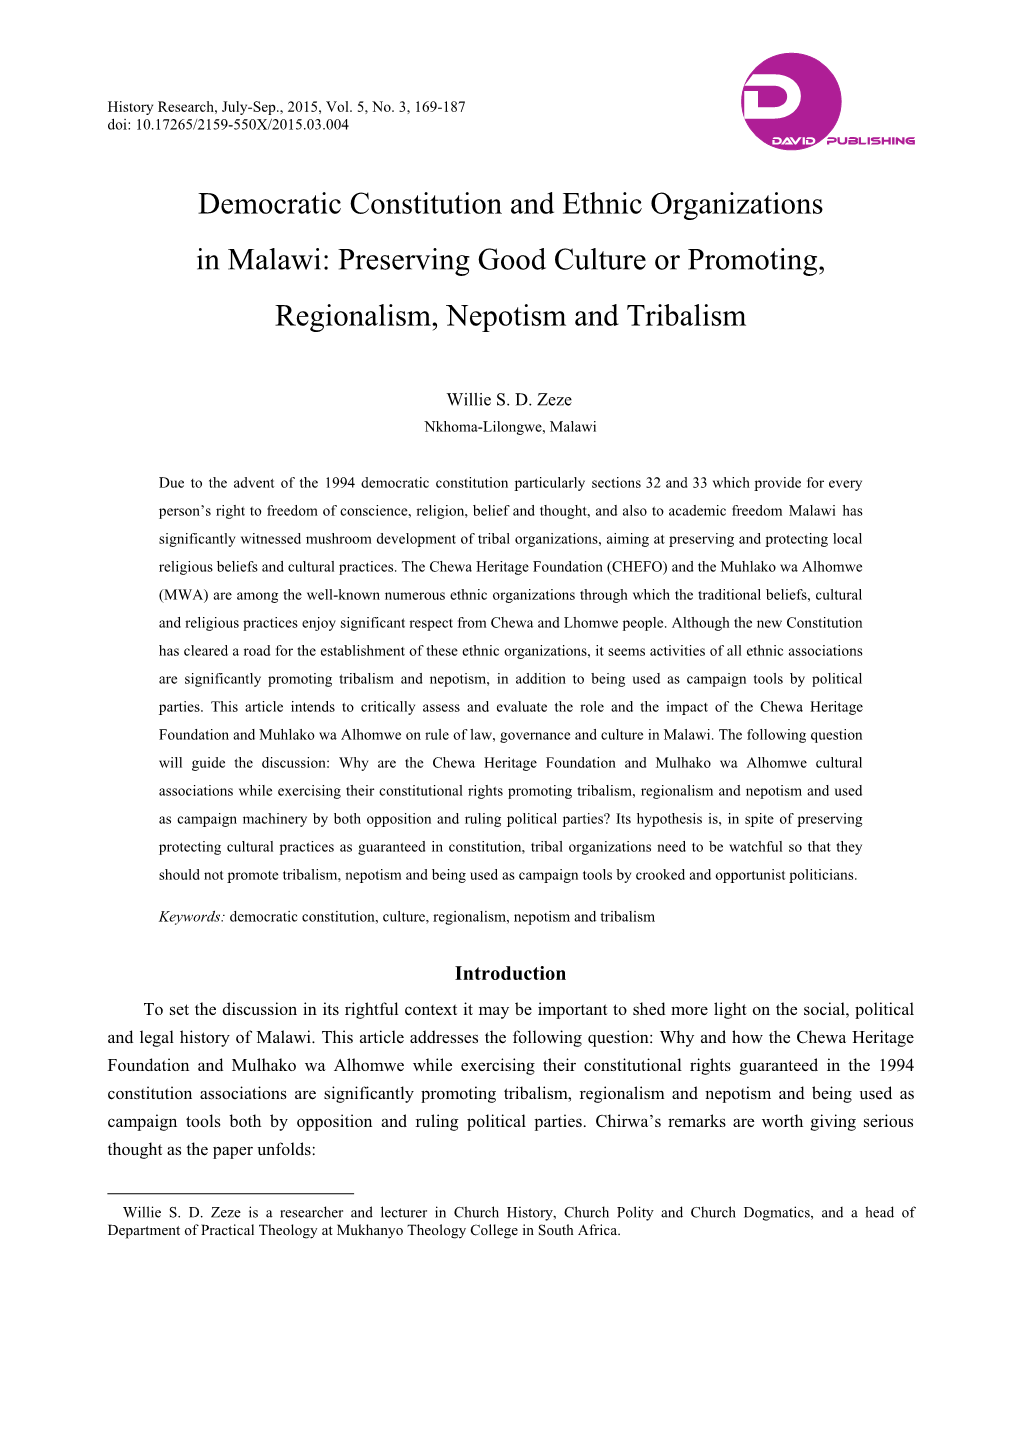 Democratic Constitution and Ethnic Organizations in Malawi: Preserving Good Culture Or Promoting, Regionalism, Nepotism and Tribalism